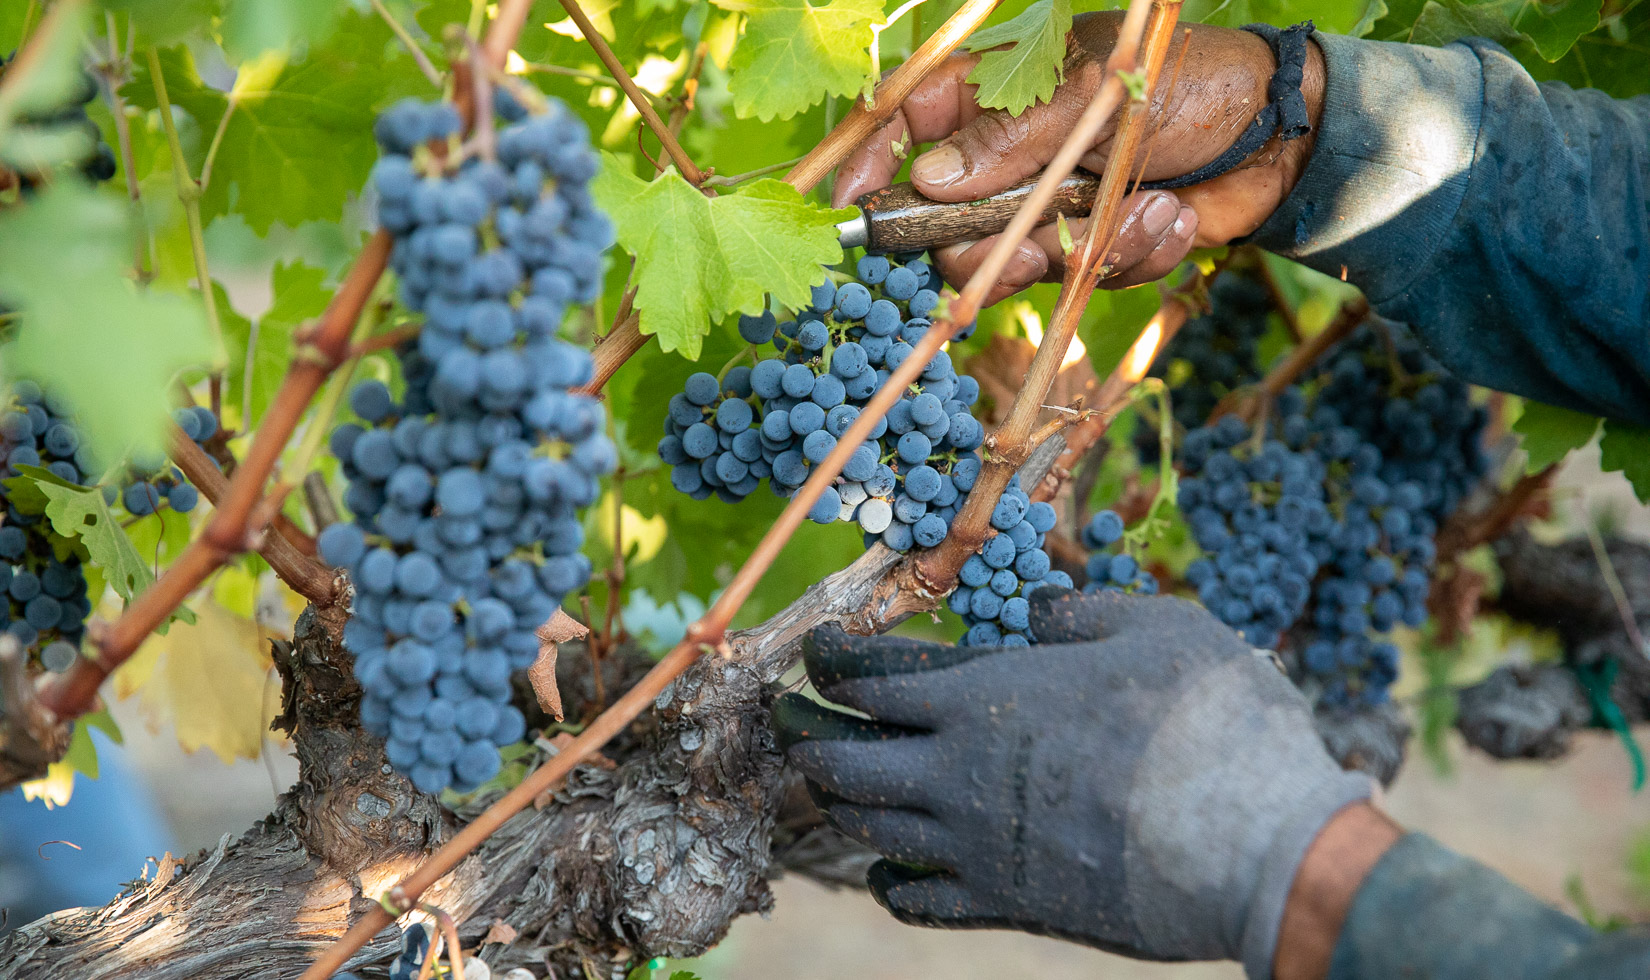 A pair of hands harvesting a purple bundle from the vine with a grape-hook.